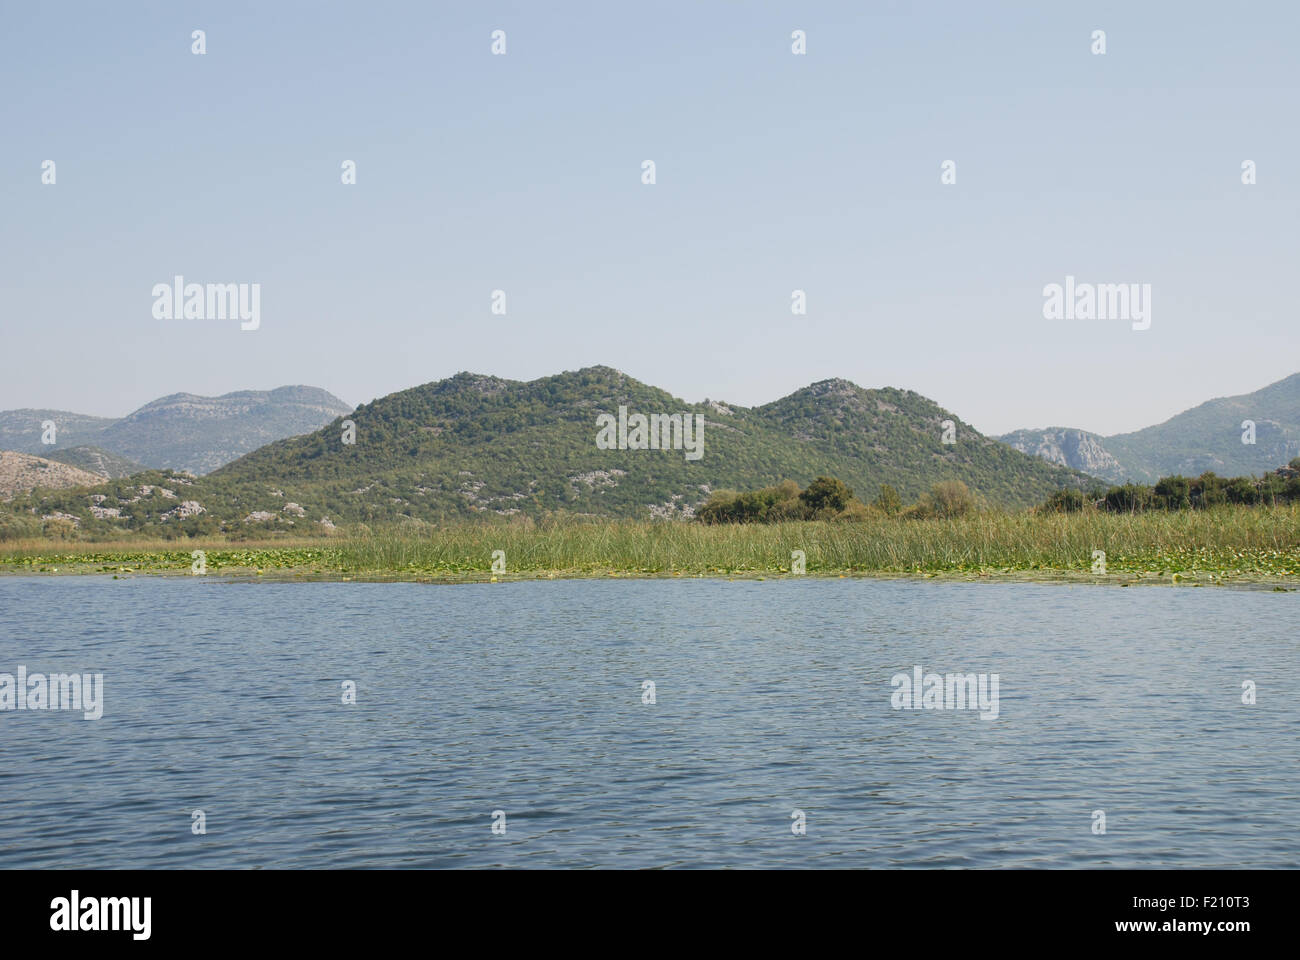 Limestone mountains rise above the water of Skadar lake in Montenegro Stock Photo